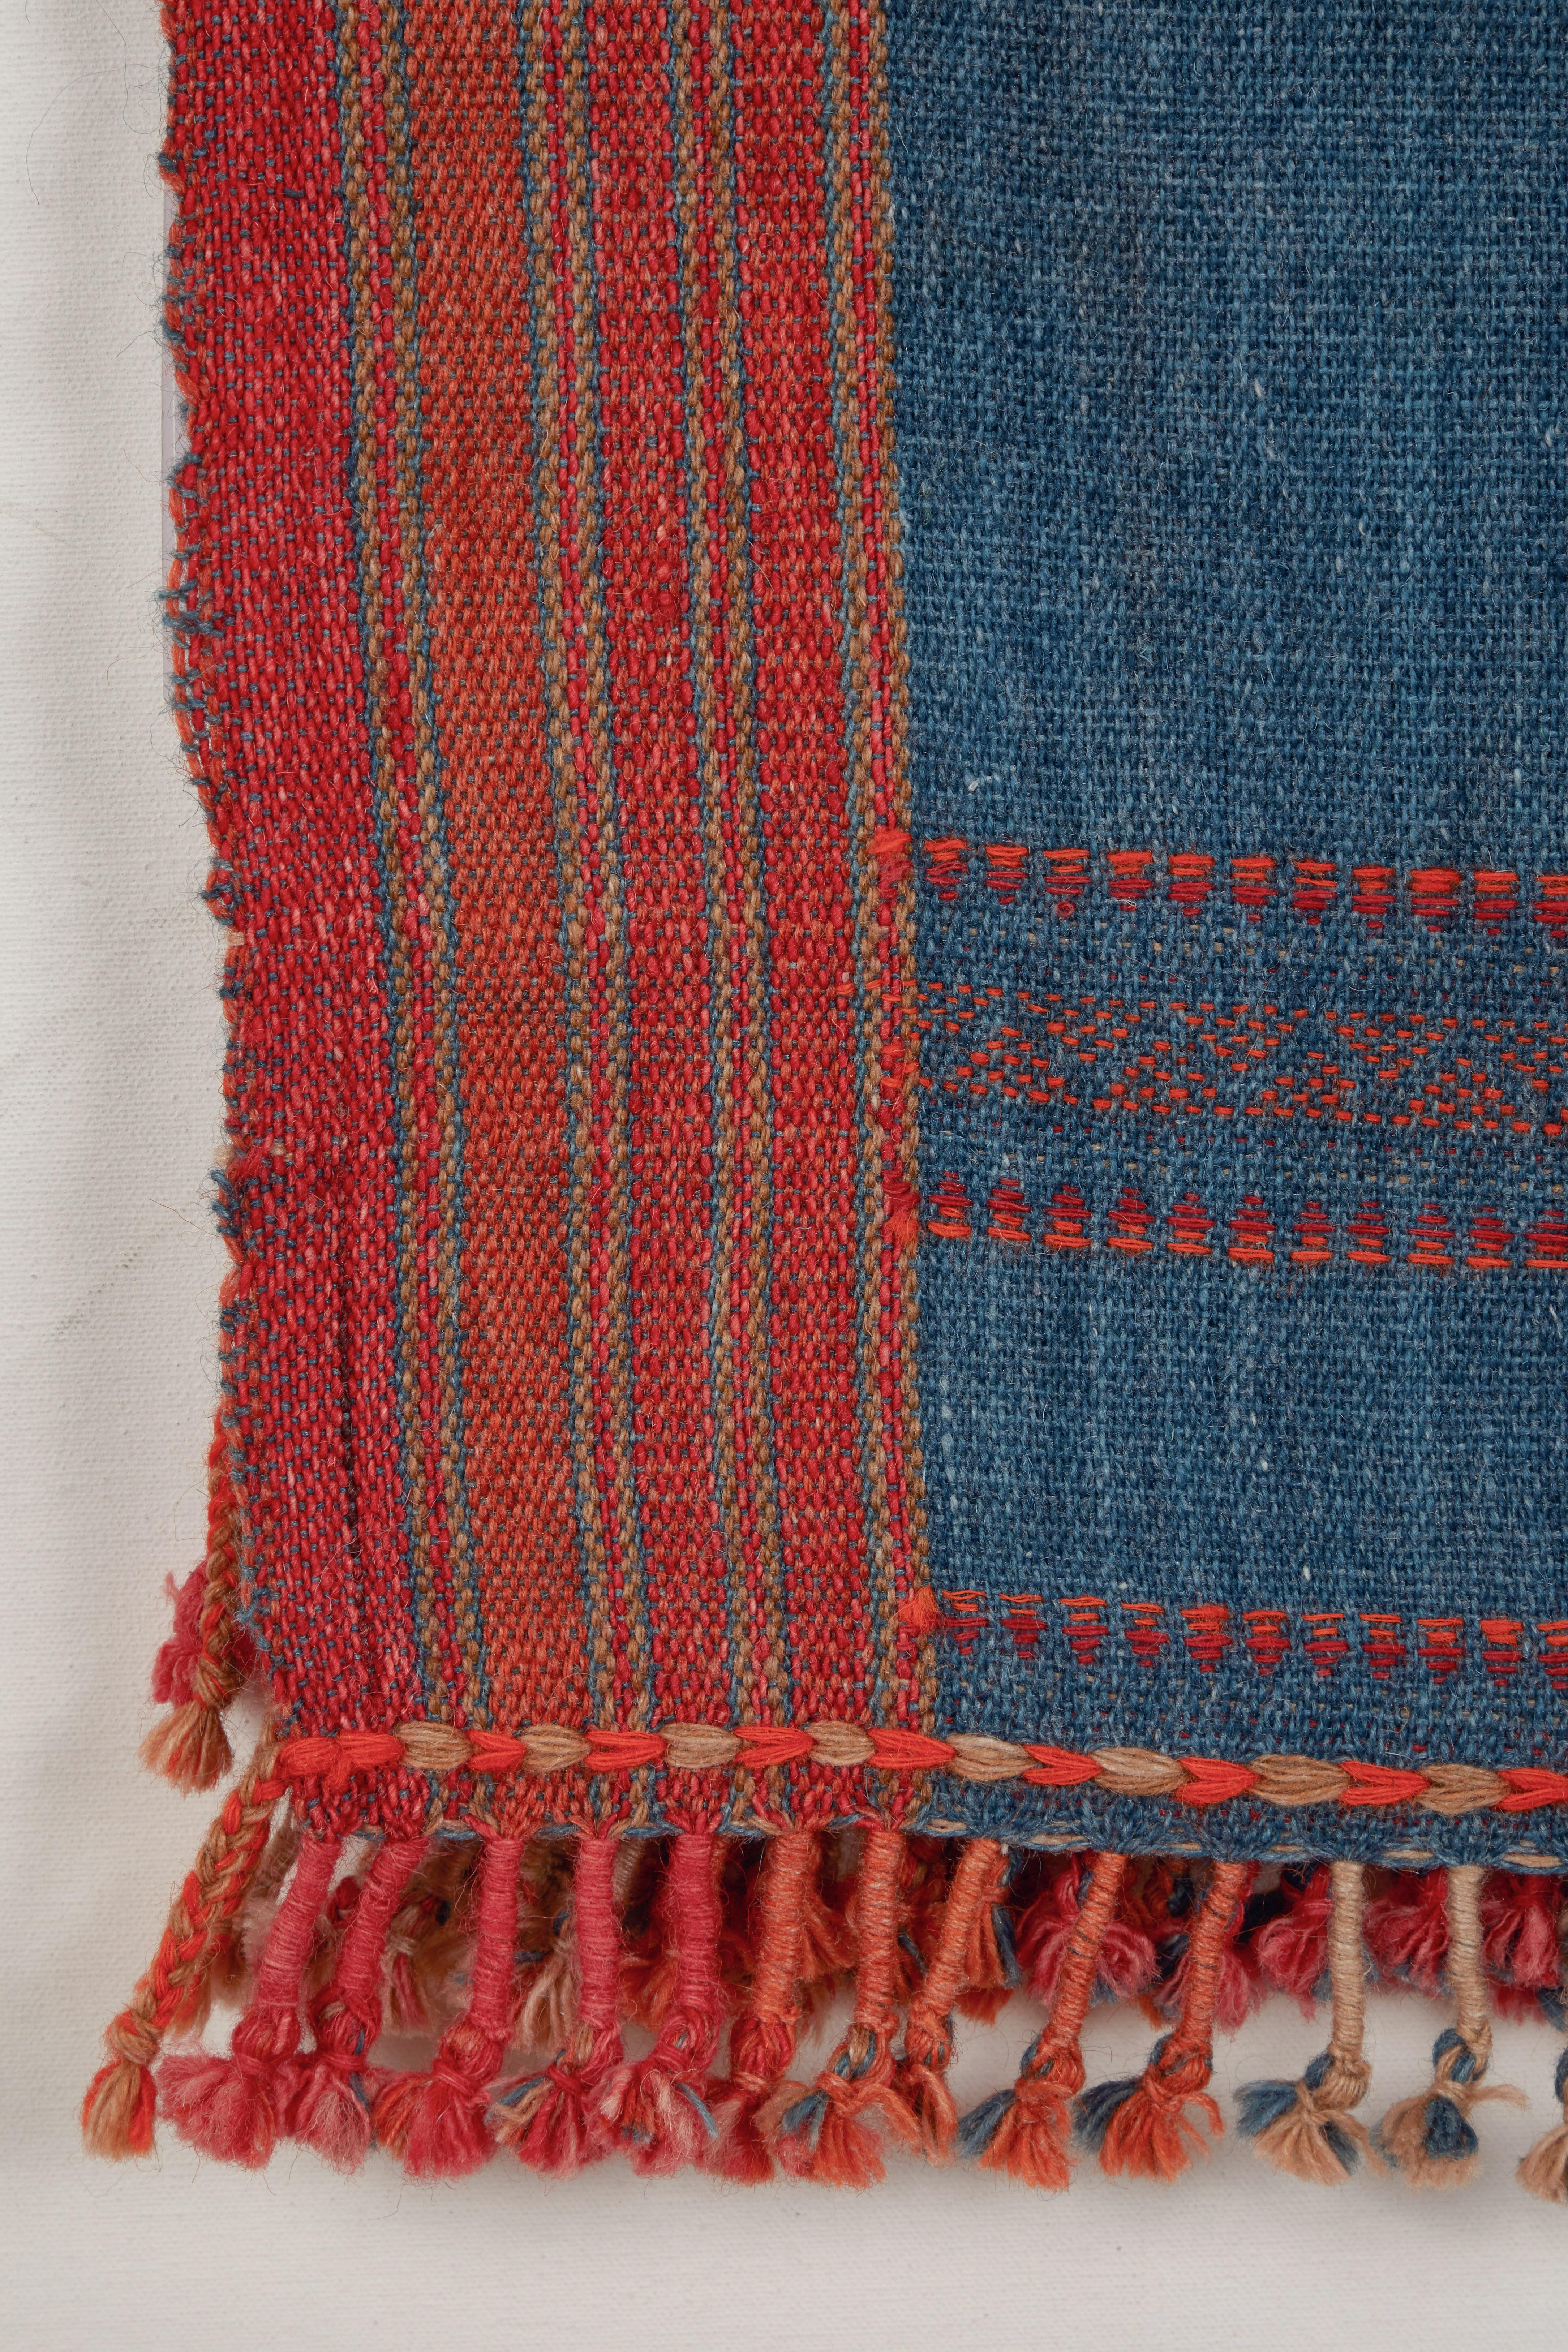 Handwoven wool throws with hand twisted tassels. Orange and indigo blue. Slightly fuzzy weave. Made in Kutch area of Gujarat, India.